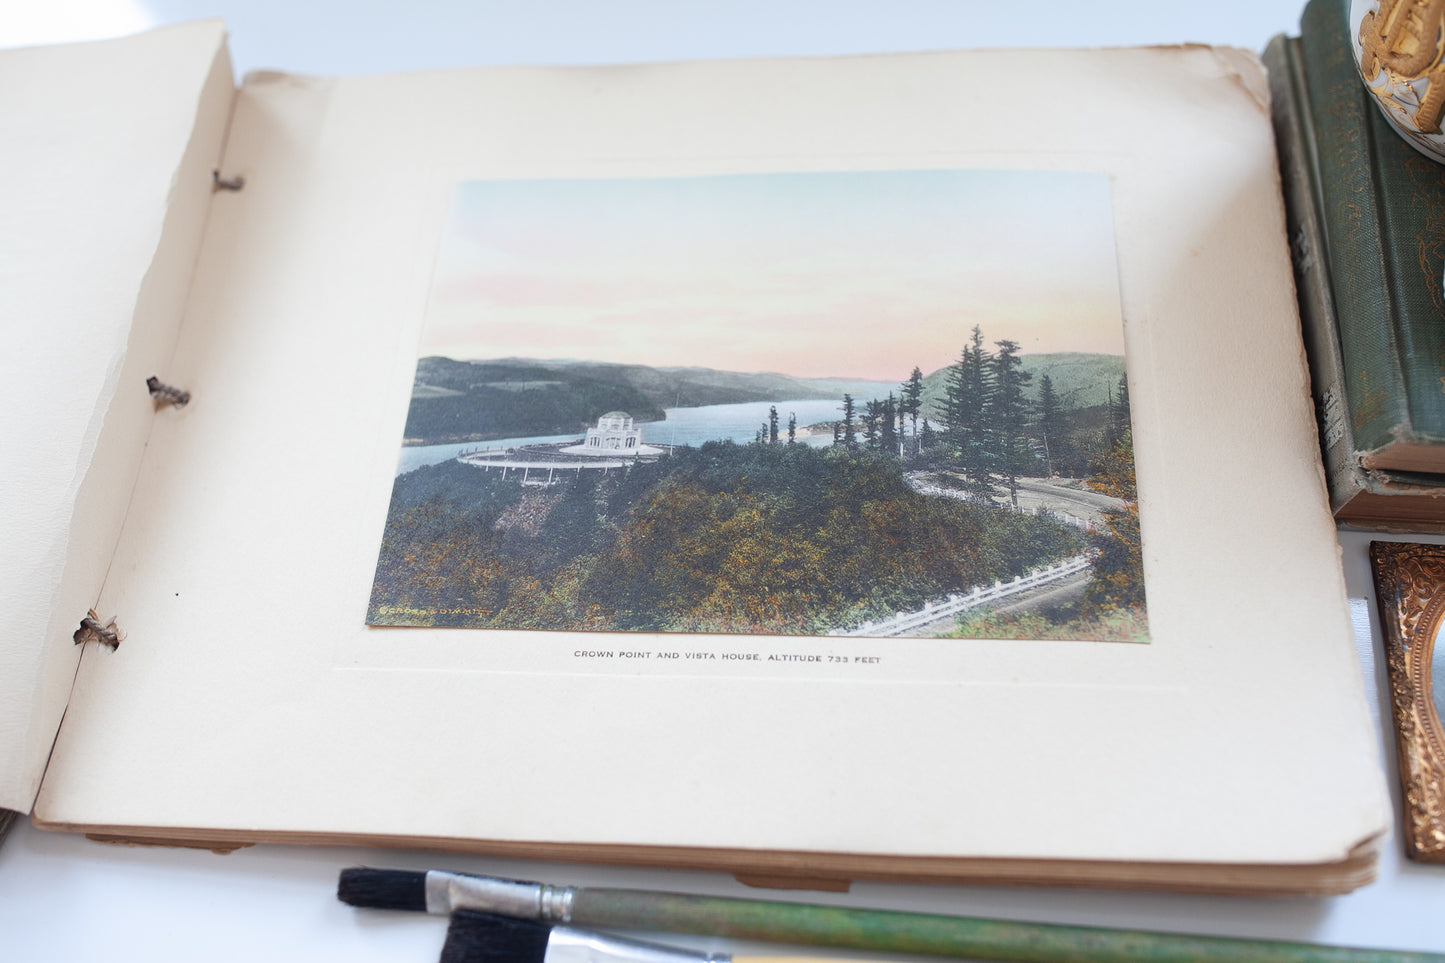 The Columbia River Highway: America's Greatest Scenic Drive by Cross & Dimmitt -Hand Colored Landscape Art- Book -Scenic Drive